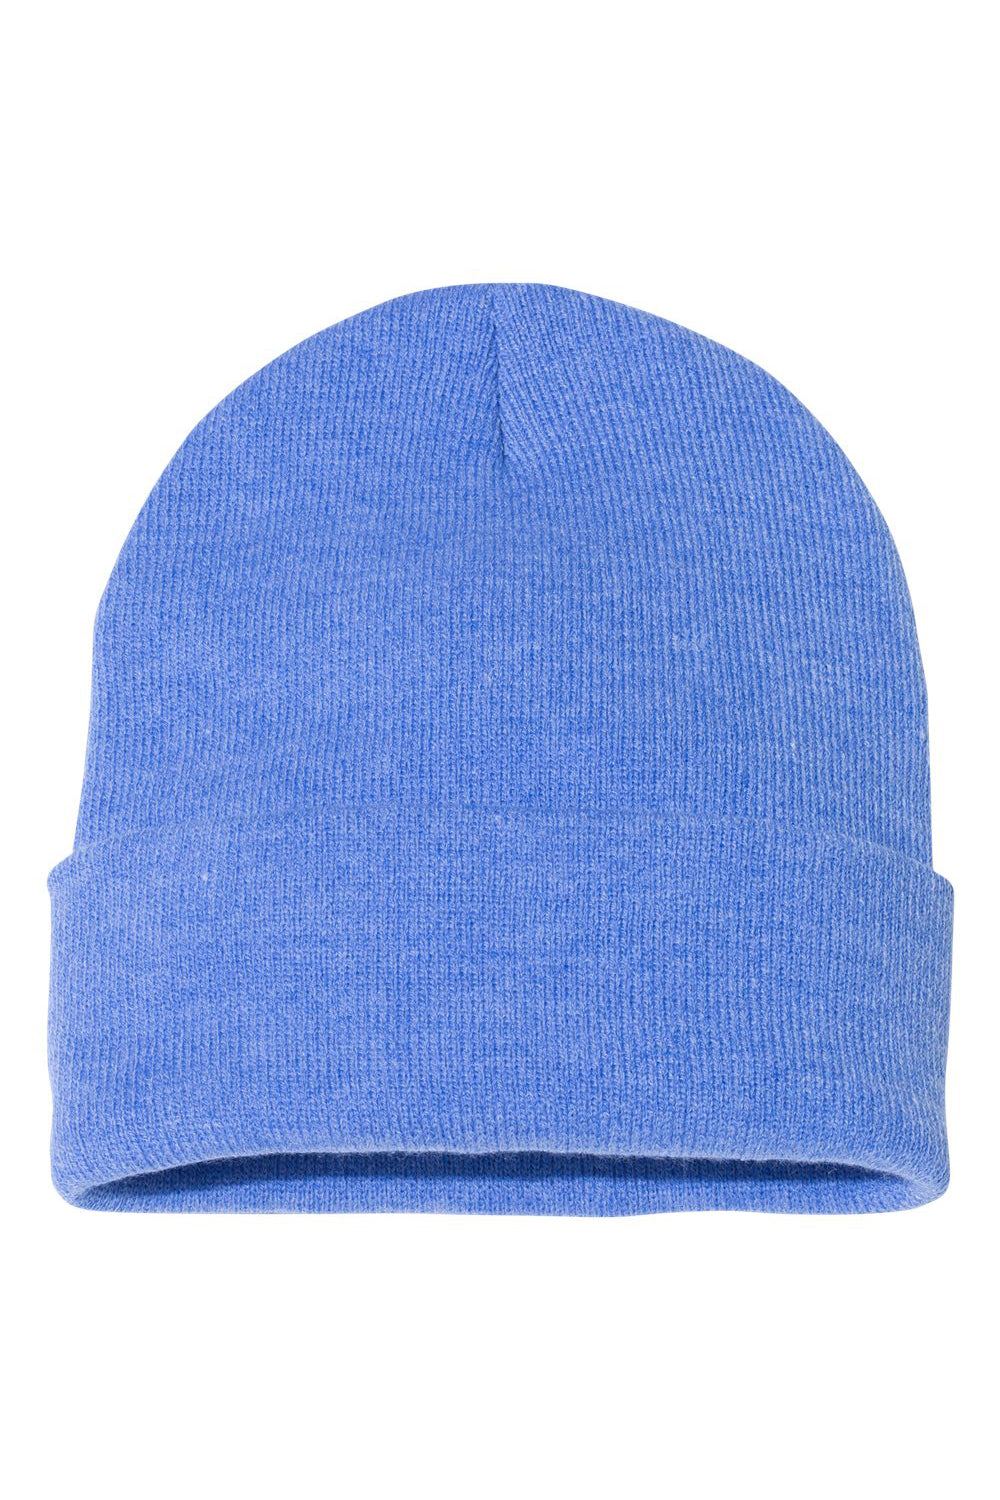 Sportsman SP12 Mens Solid Cuffed Beanie Heather Royal Blue Flat Front